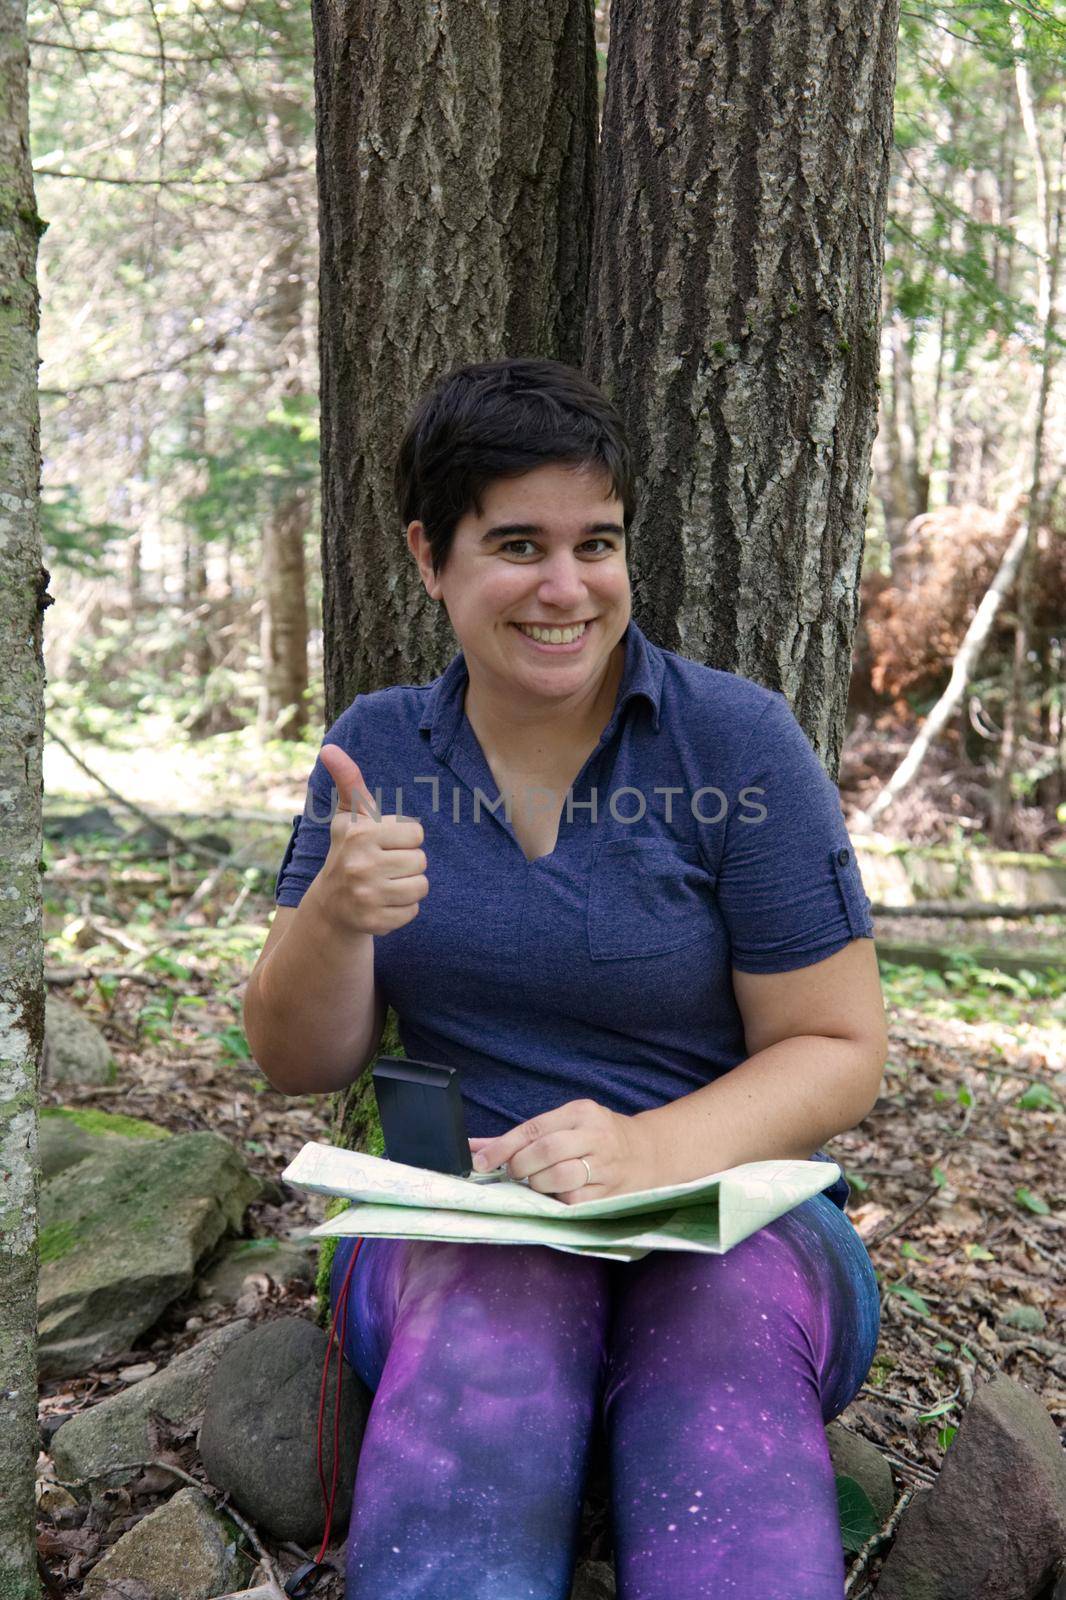 Giving thumbs up approval to her camping or hiking trip 